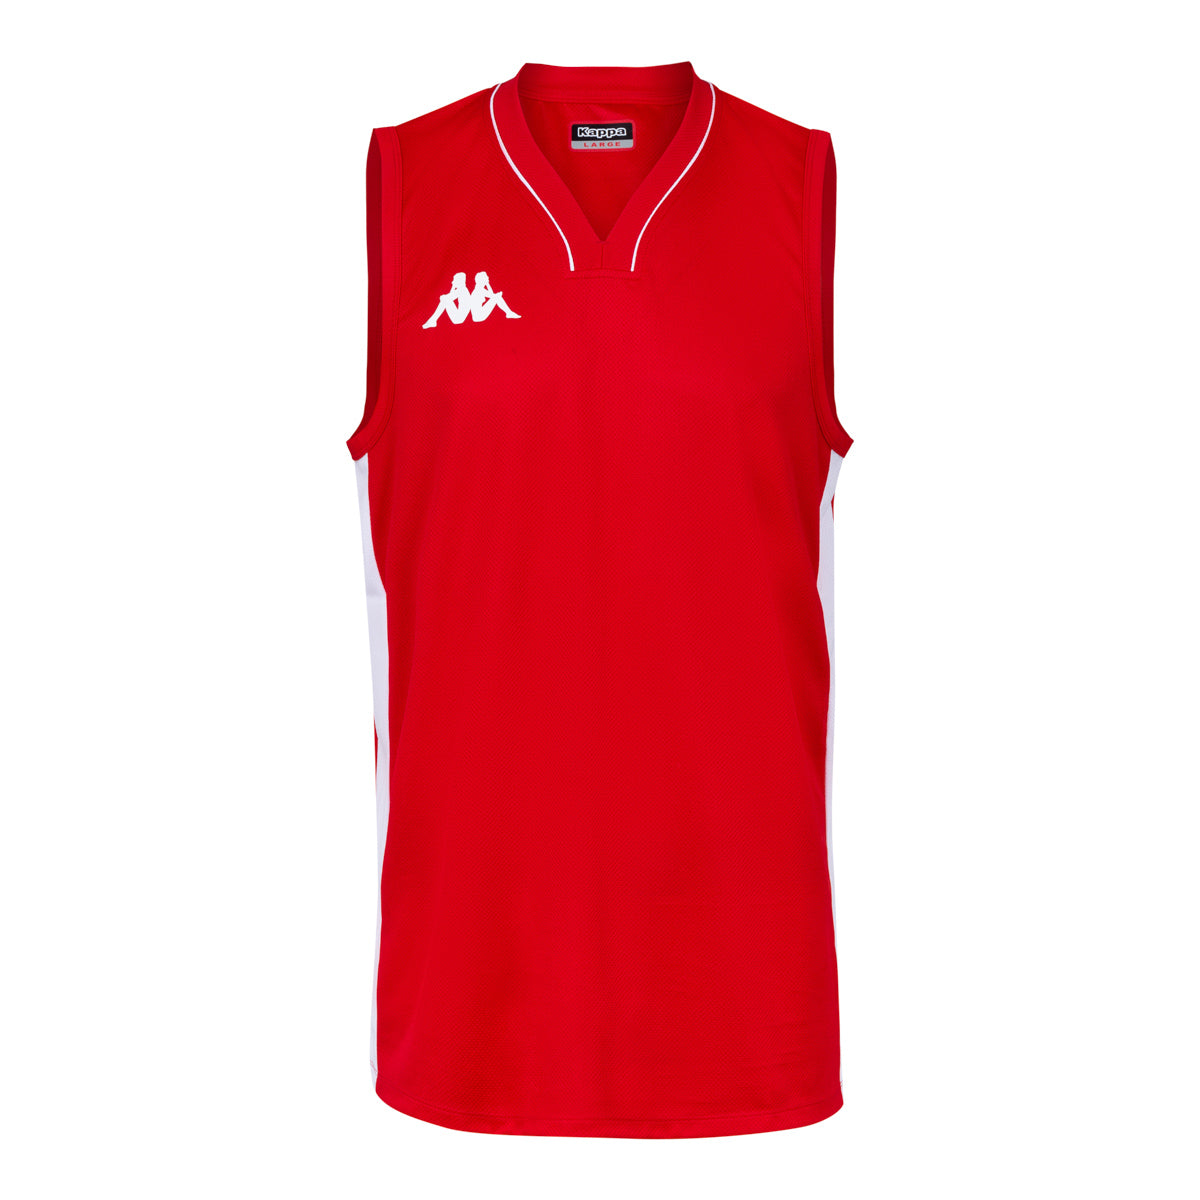 Maillot Basket Cairo Rouge Homme - Image 1